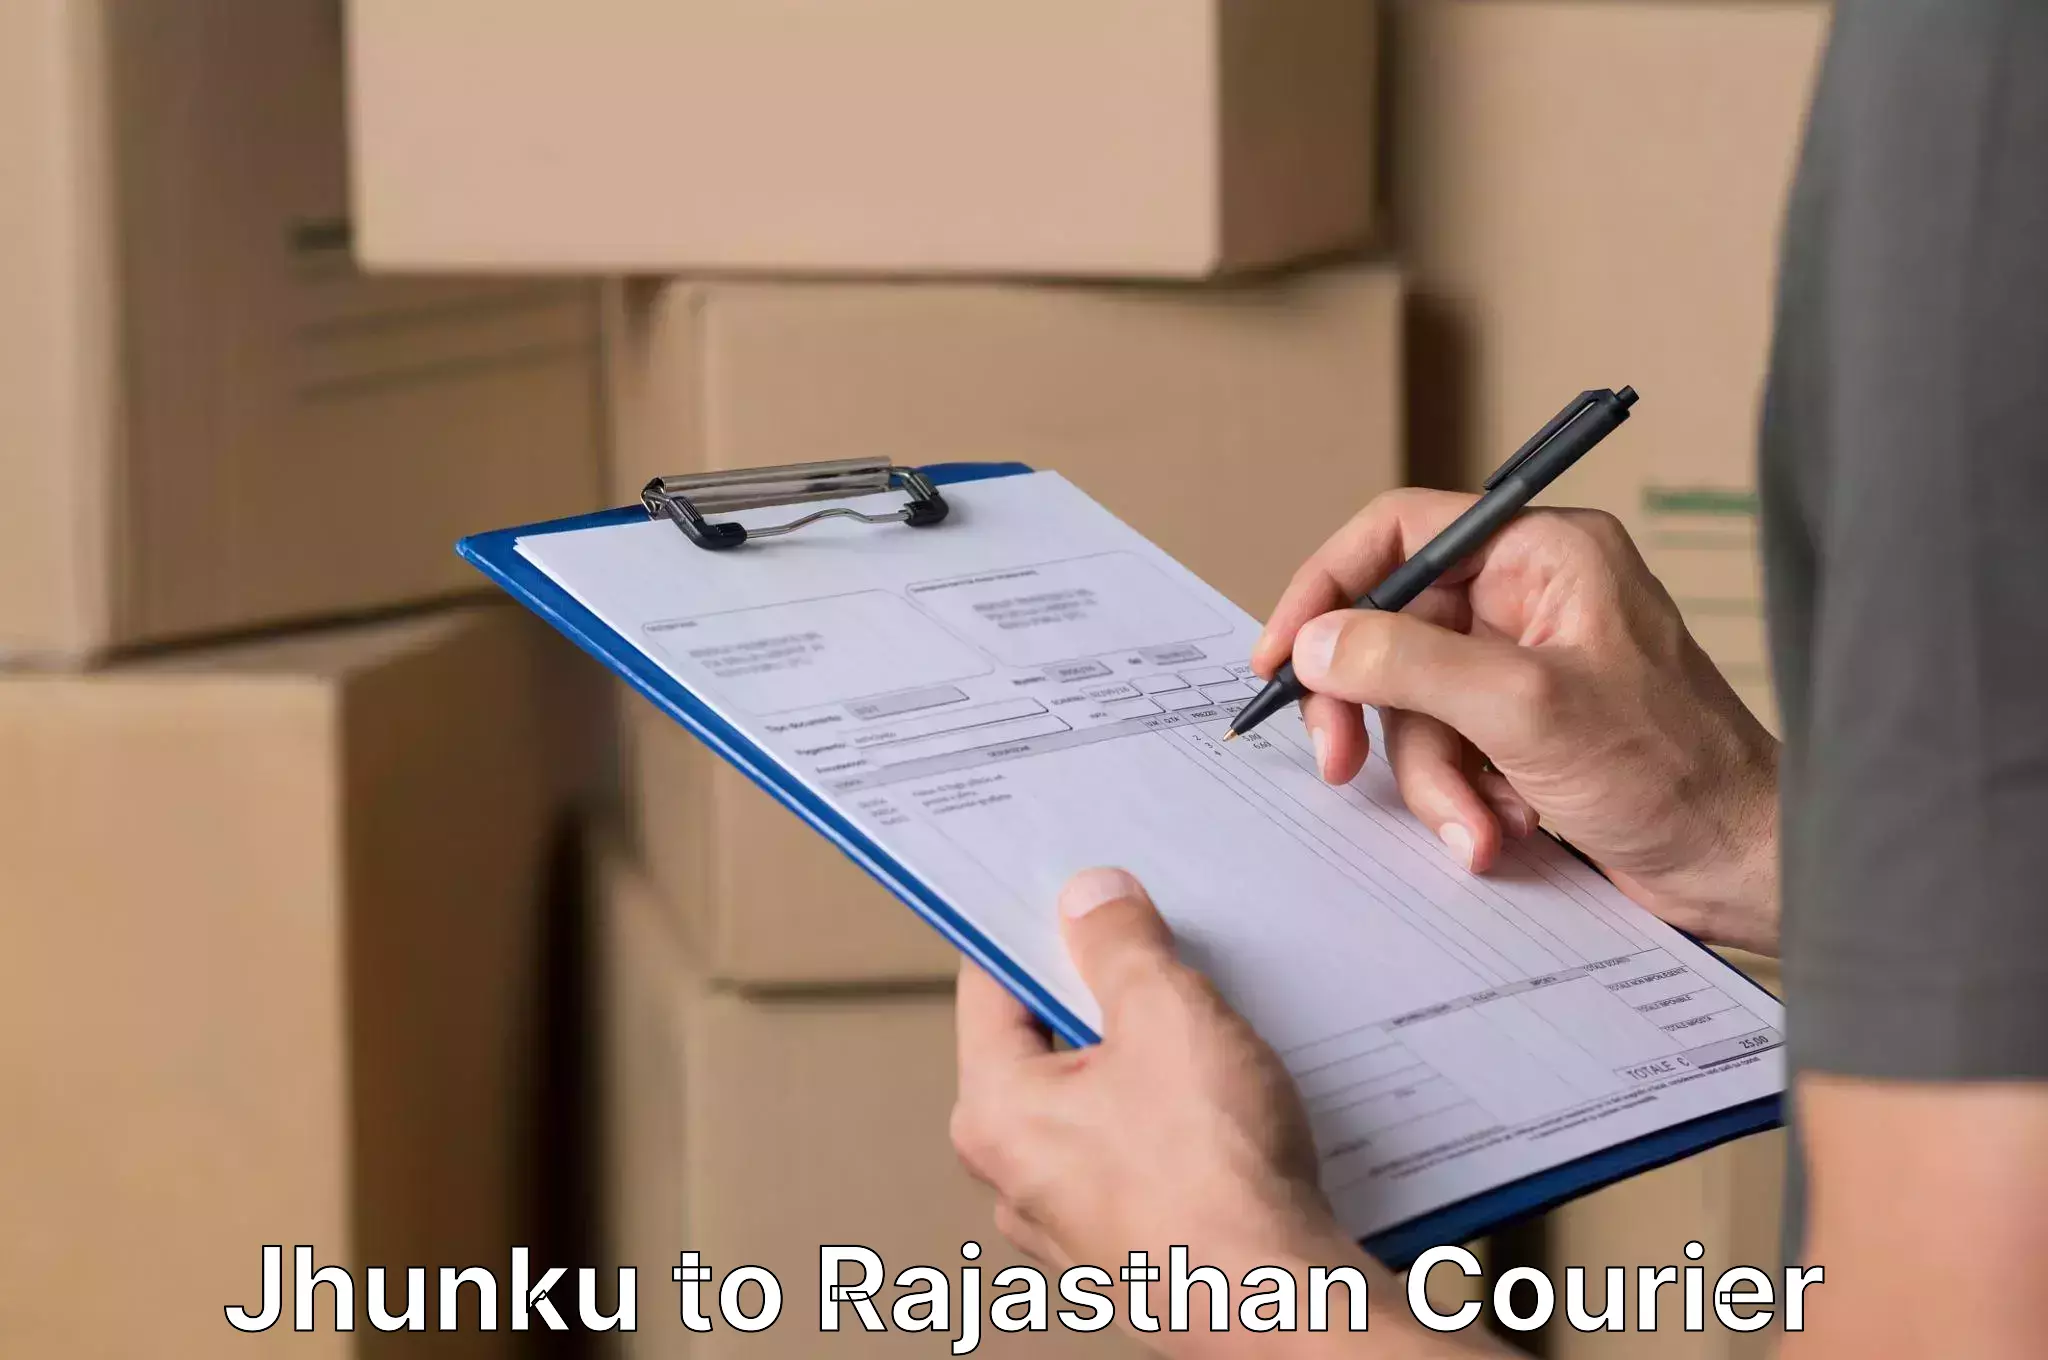 Quality relocation assistance Jhunku to Rajasthan